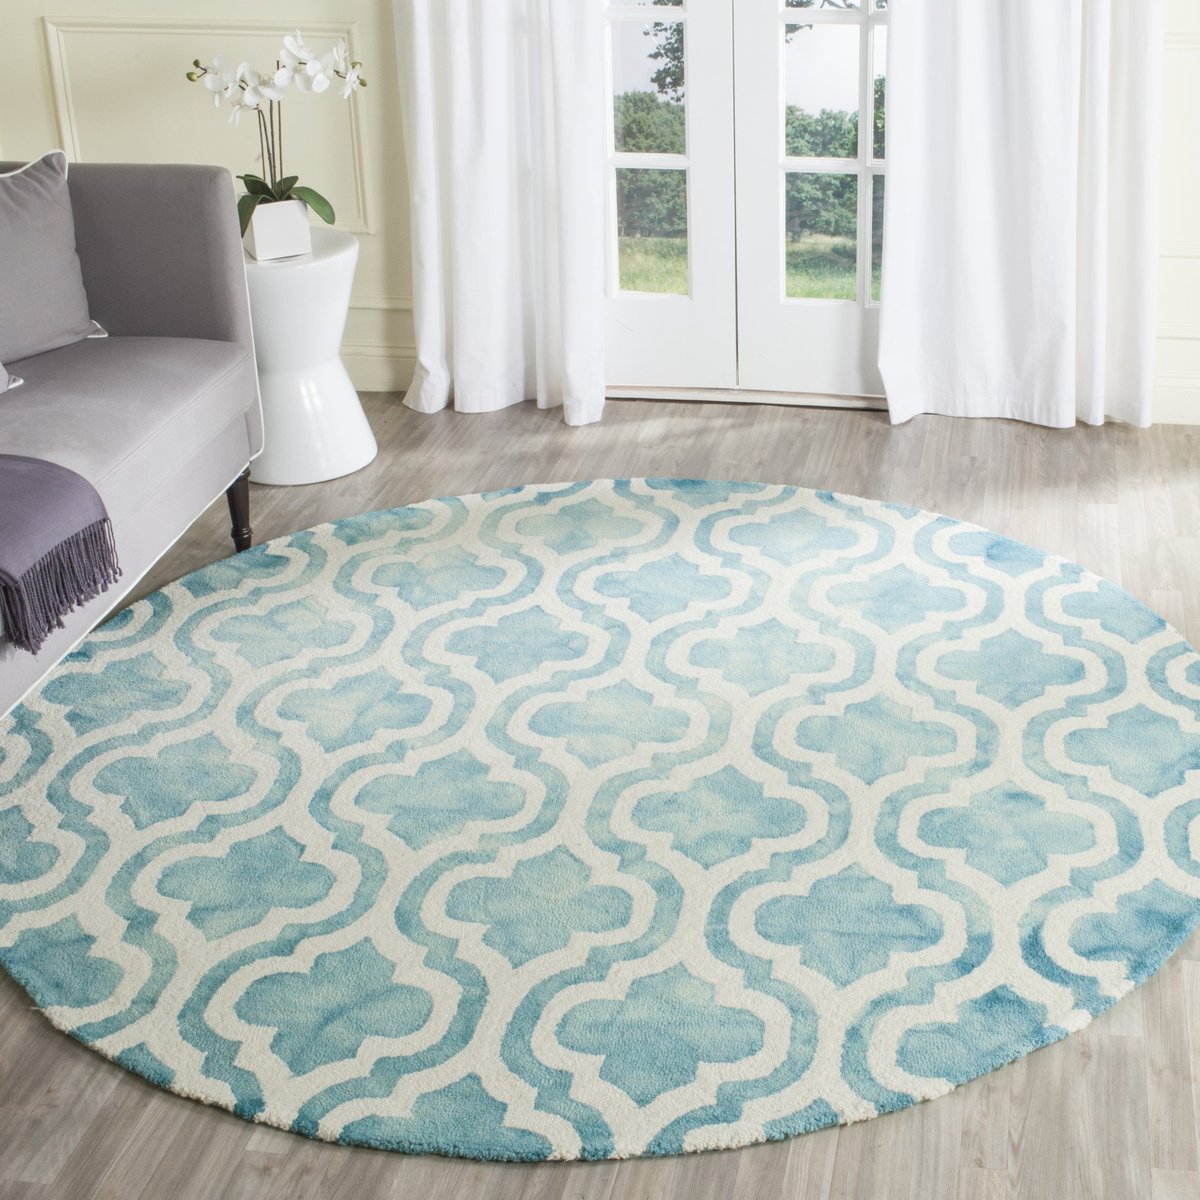 Safavieh Dip Dye Collection DDY715D Handmade Chevron Stripe Watercolor Ivory and Charcoal Wool Round Area Rug 7' Diameter